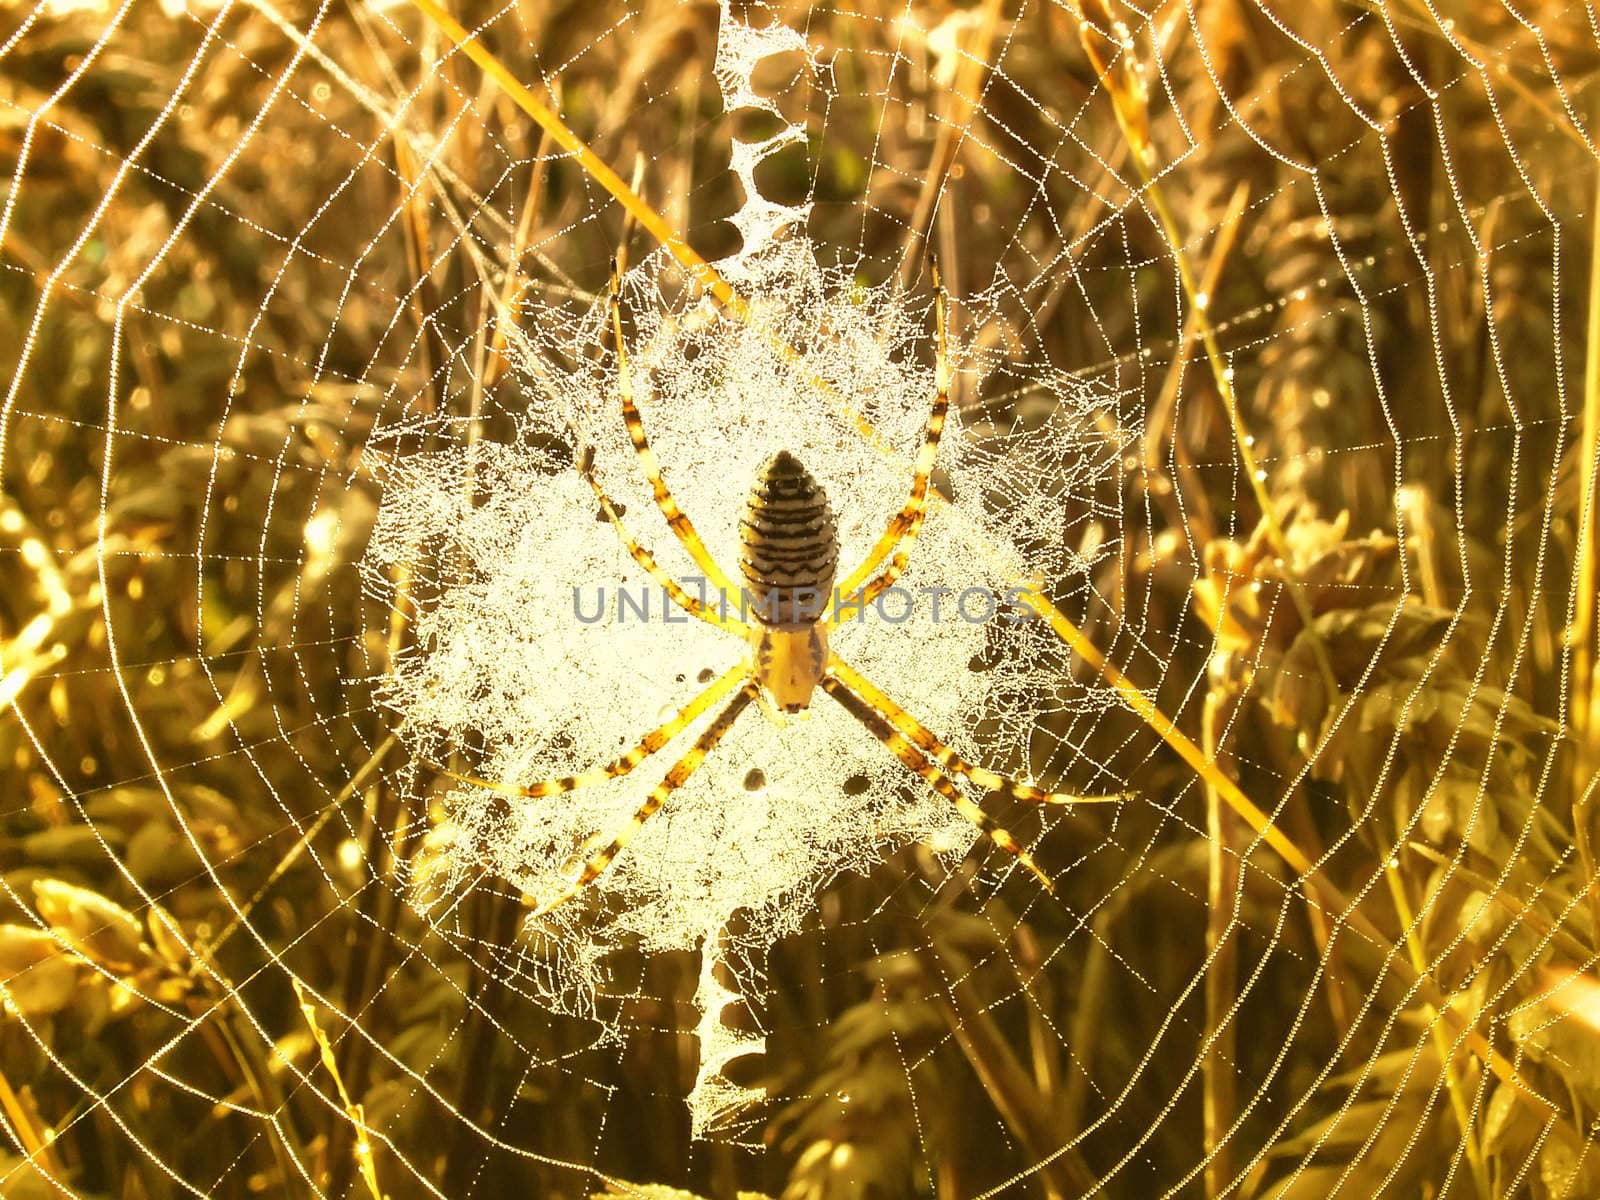 spider in its web in the wheat by njaj